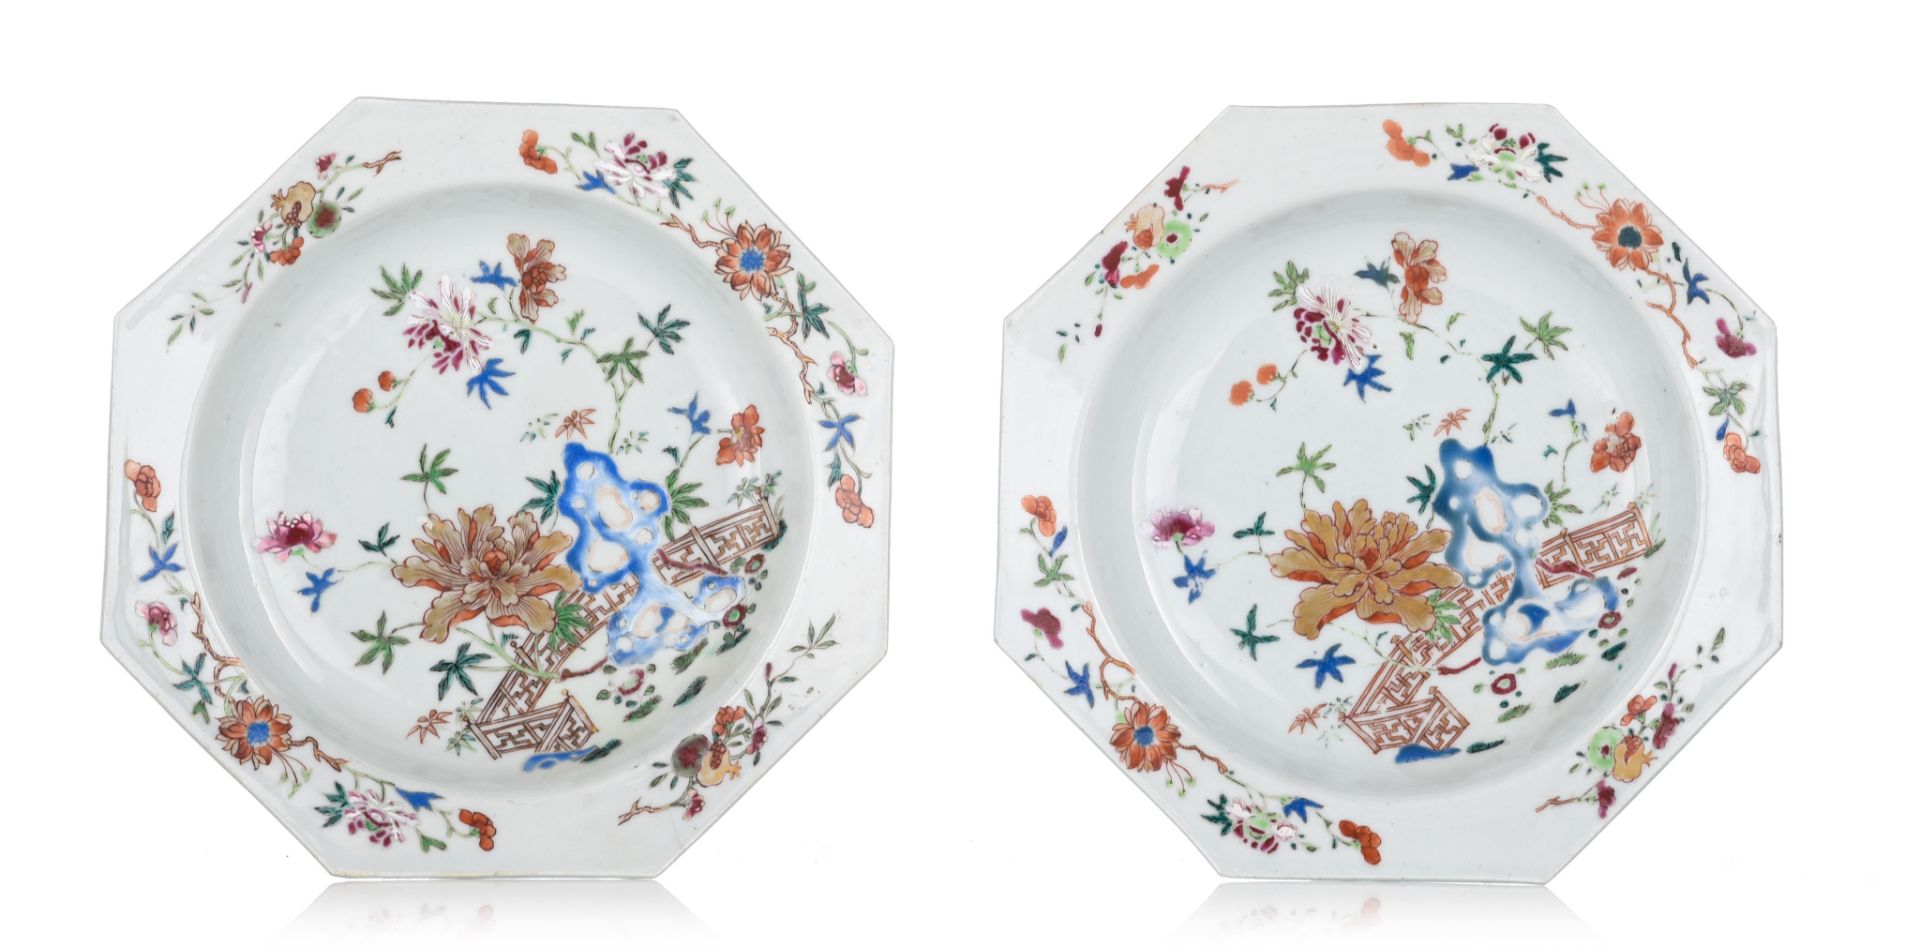 A collection of six Chinese famille rose export porcelain plates, 18thC, ¯ 23,5 cm - Image 8 of 10